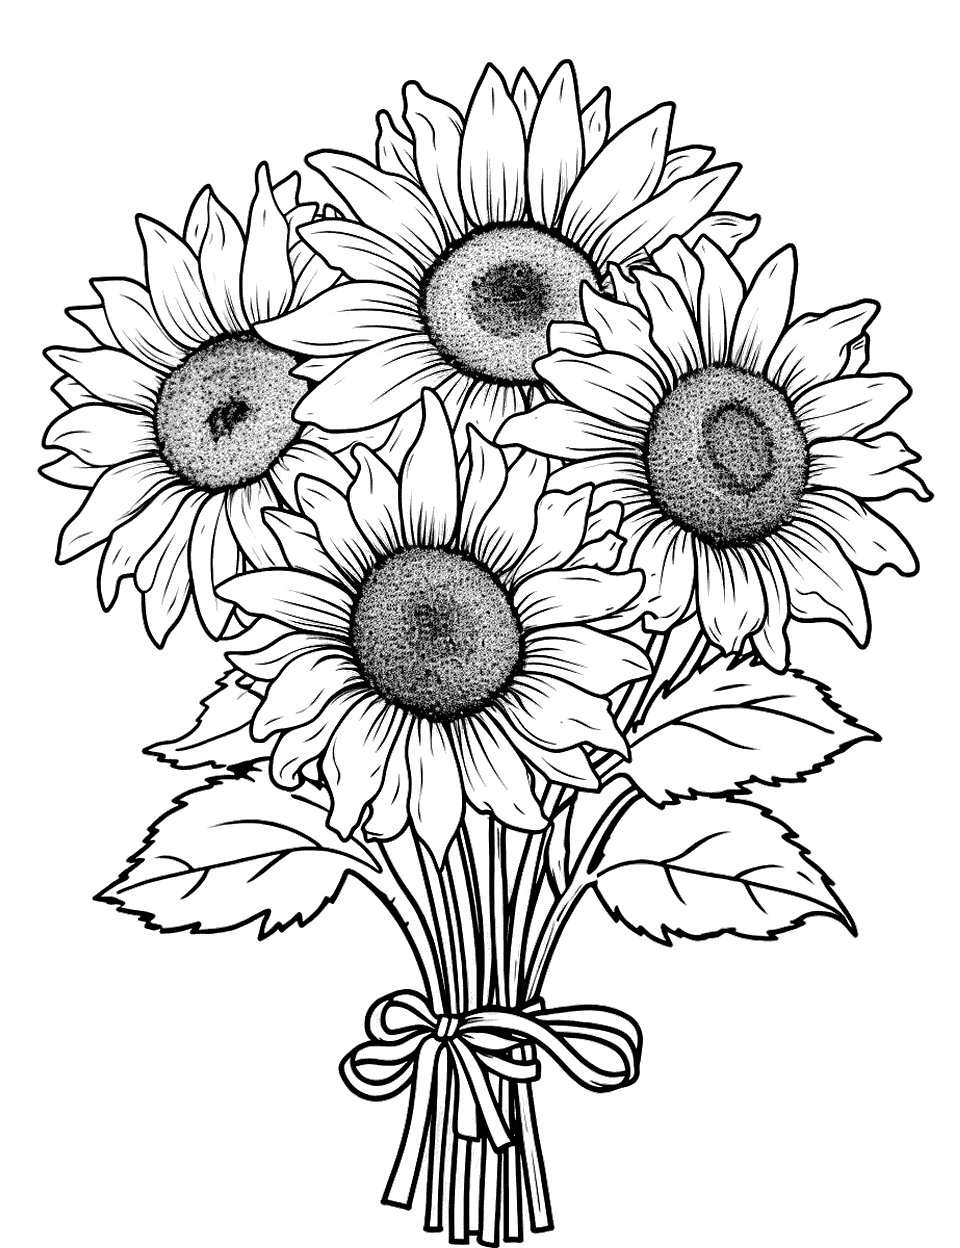 Sunflower Bouquet Coloring Page - A bouquet of sunflowers tied together with a ribbon.